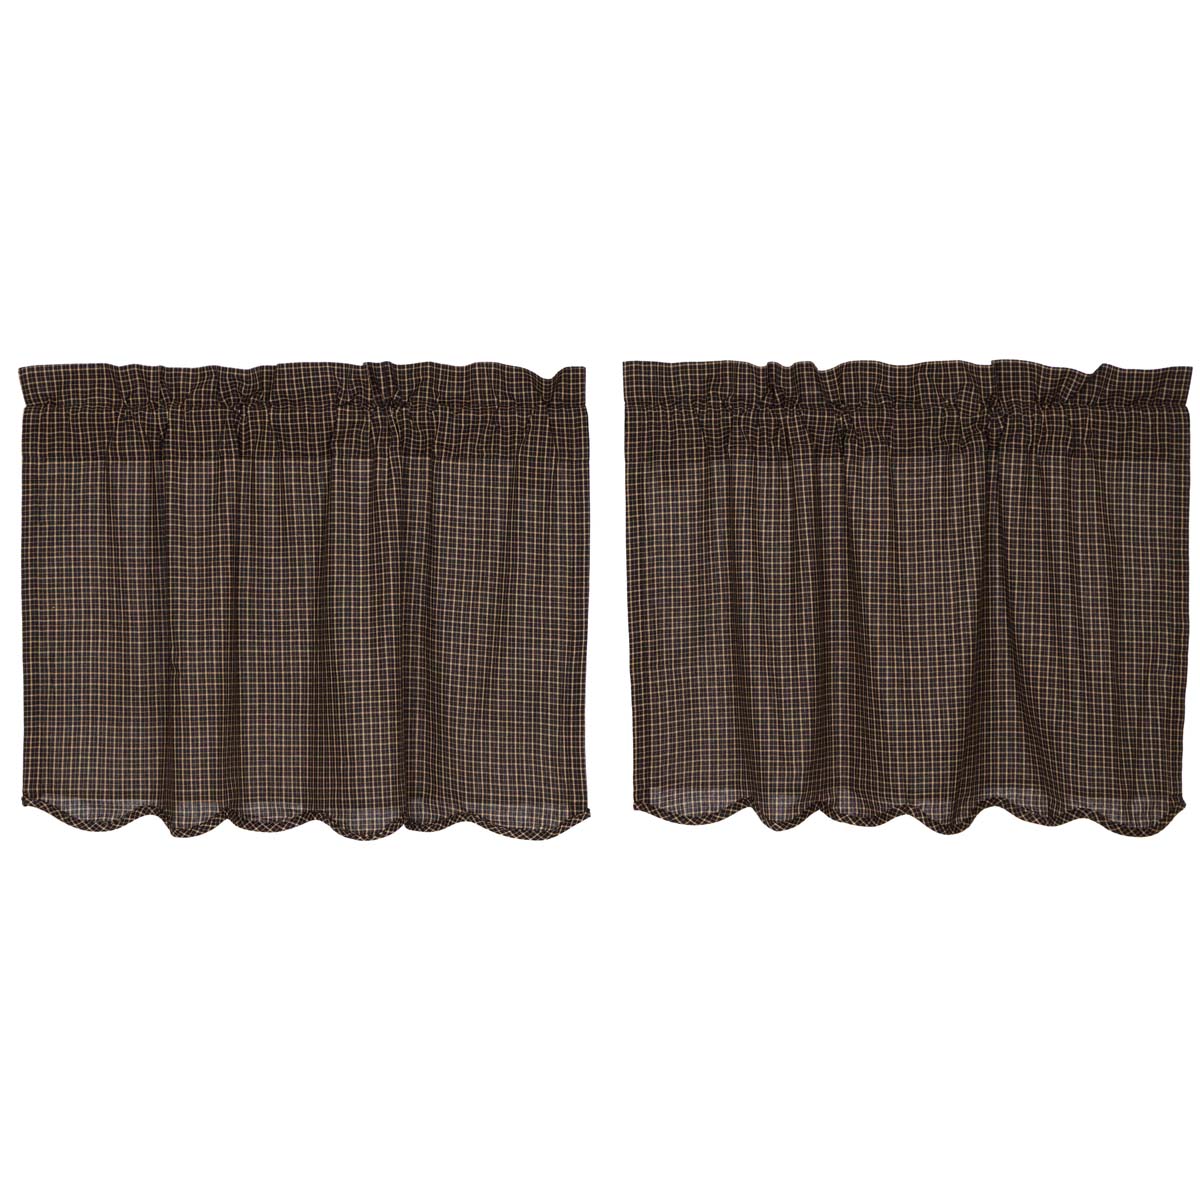 Kettle Grove Plaid Tier Scalloped Set of 2 L24xW36